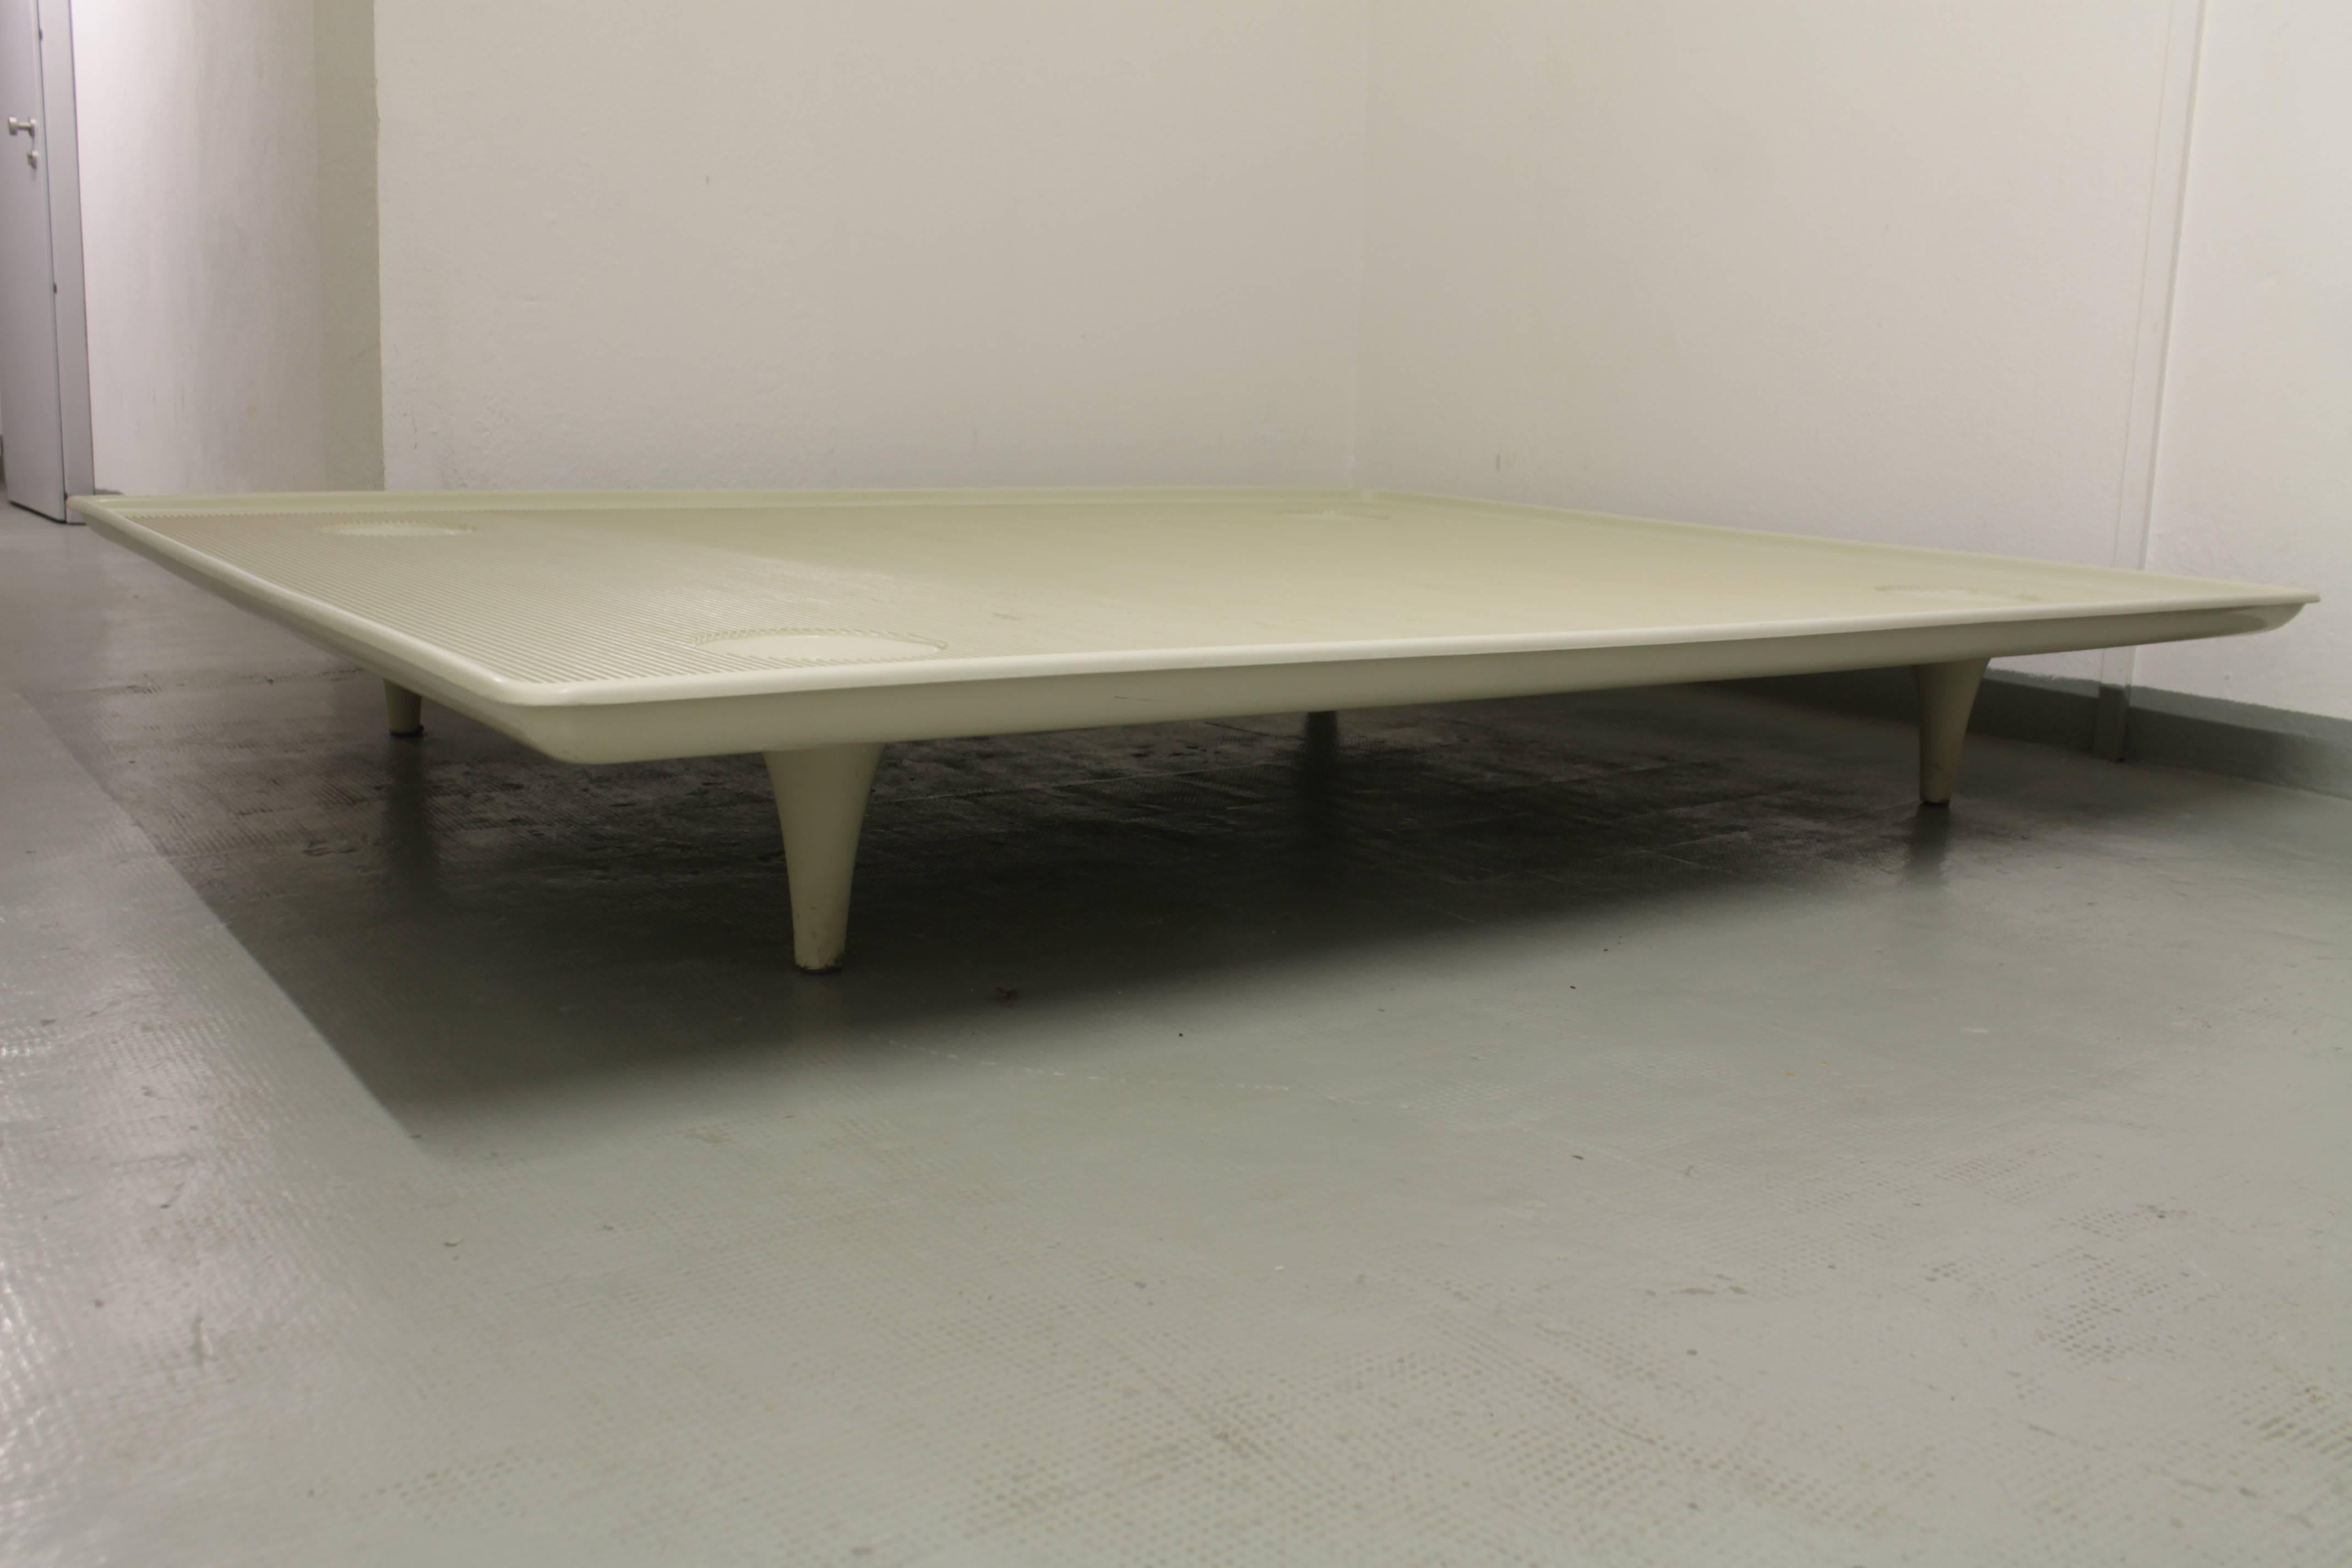 Superb bed moulded from a single piece of fiberglass-reinforced polyester with a broken white gelcoat finish
Produced by H.P. Spengler, circa 1960
Sold by Wohnbedarf AG
Very good condition, 1 or 2 very little chips
Rubber glides on ends of feets